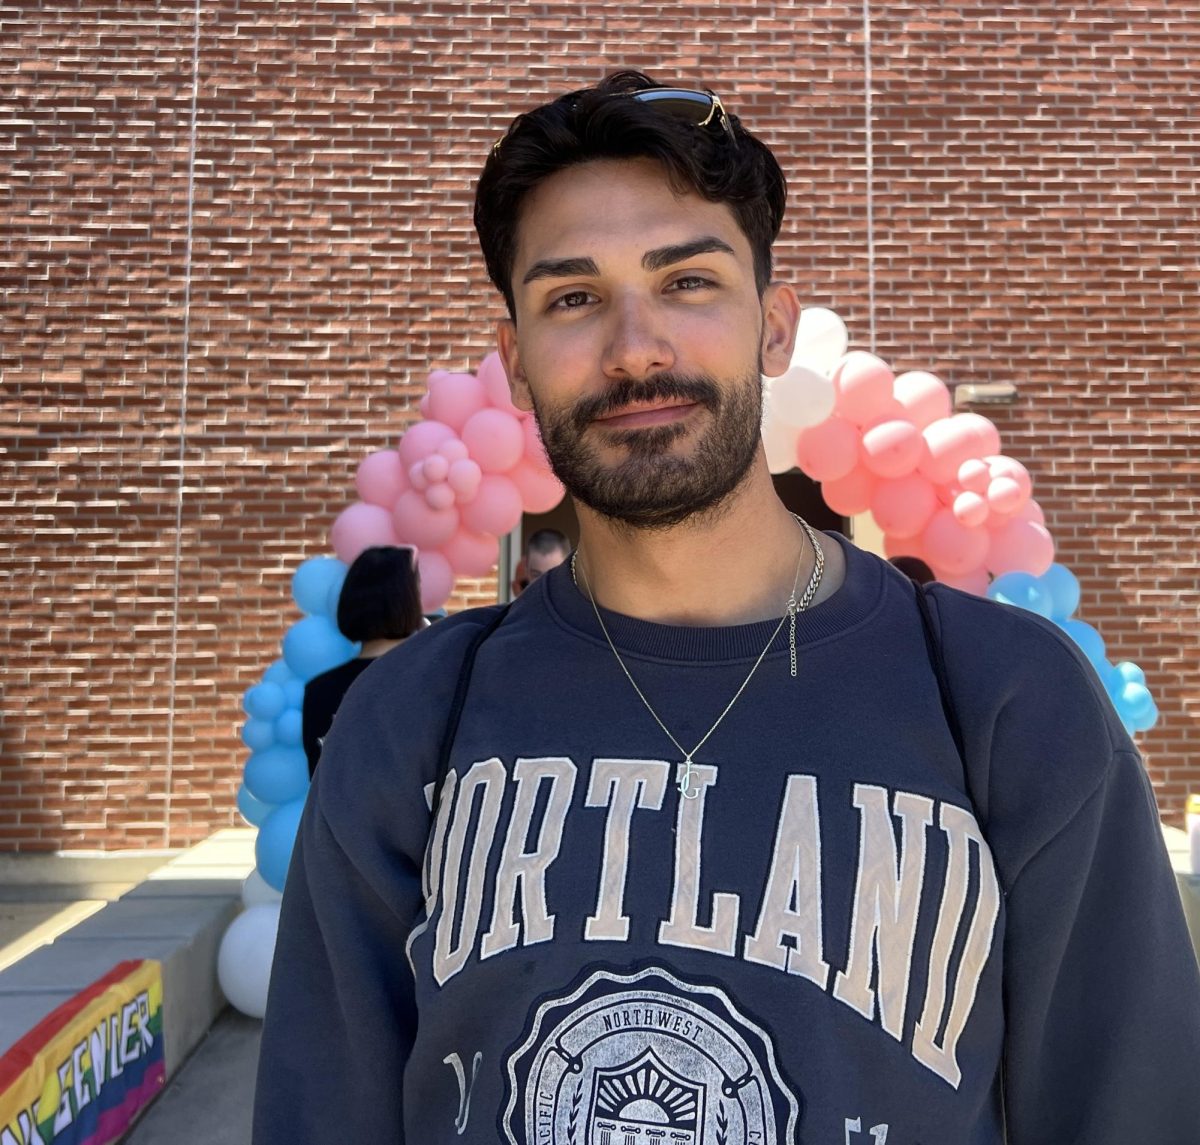 “Drag as a whole is seen as wrong. Drag performance like this, it really shows, (transgender individuals are) not anything to be feared of. (Transgender individuals are) not anything besides just regular human beings living their truth. I’m in full support of it, I love it. I hope it continues on.” - Jonathan Gonzalez, City College biology major